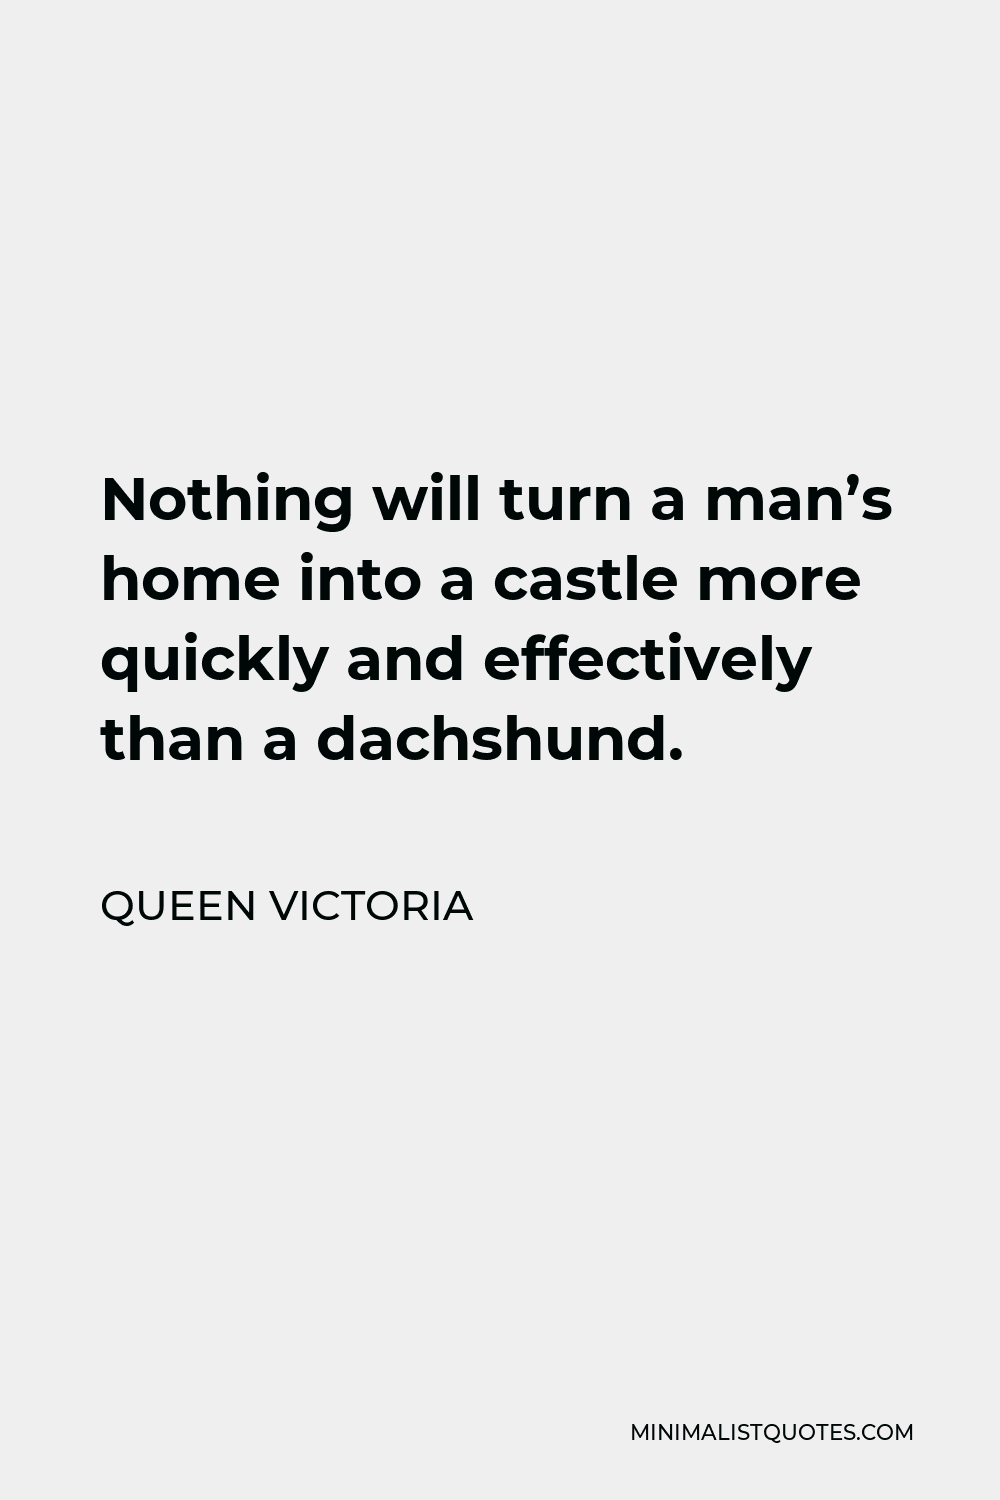 Queen Victoria Quote - Nothing will turn a man’s home into a castle more quickly and effectively than a dachshund.